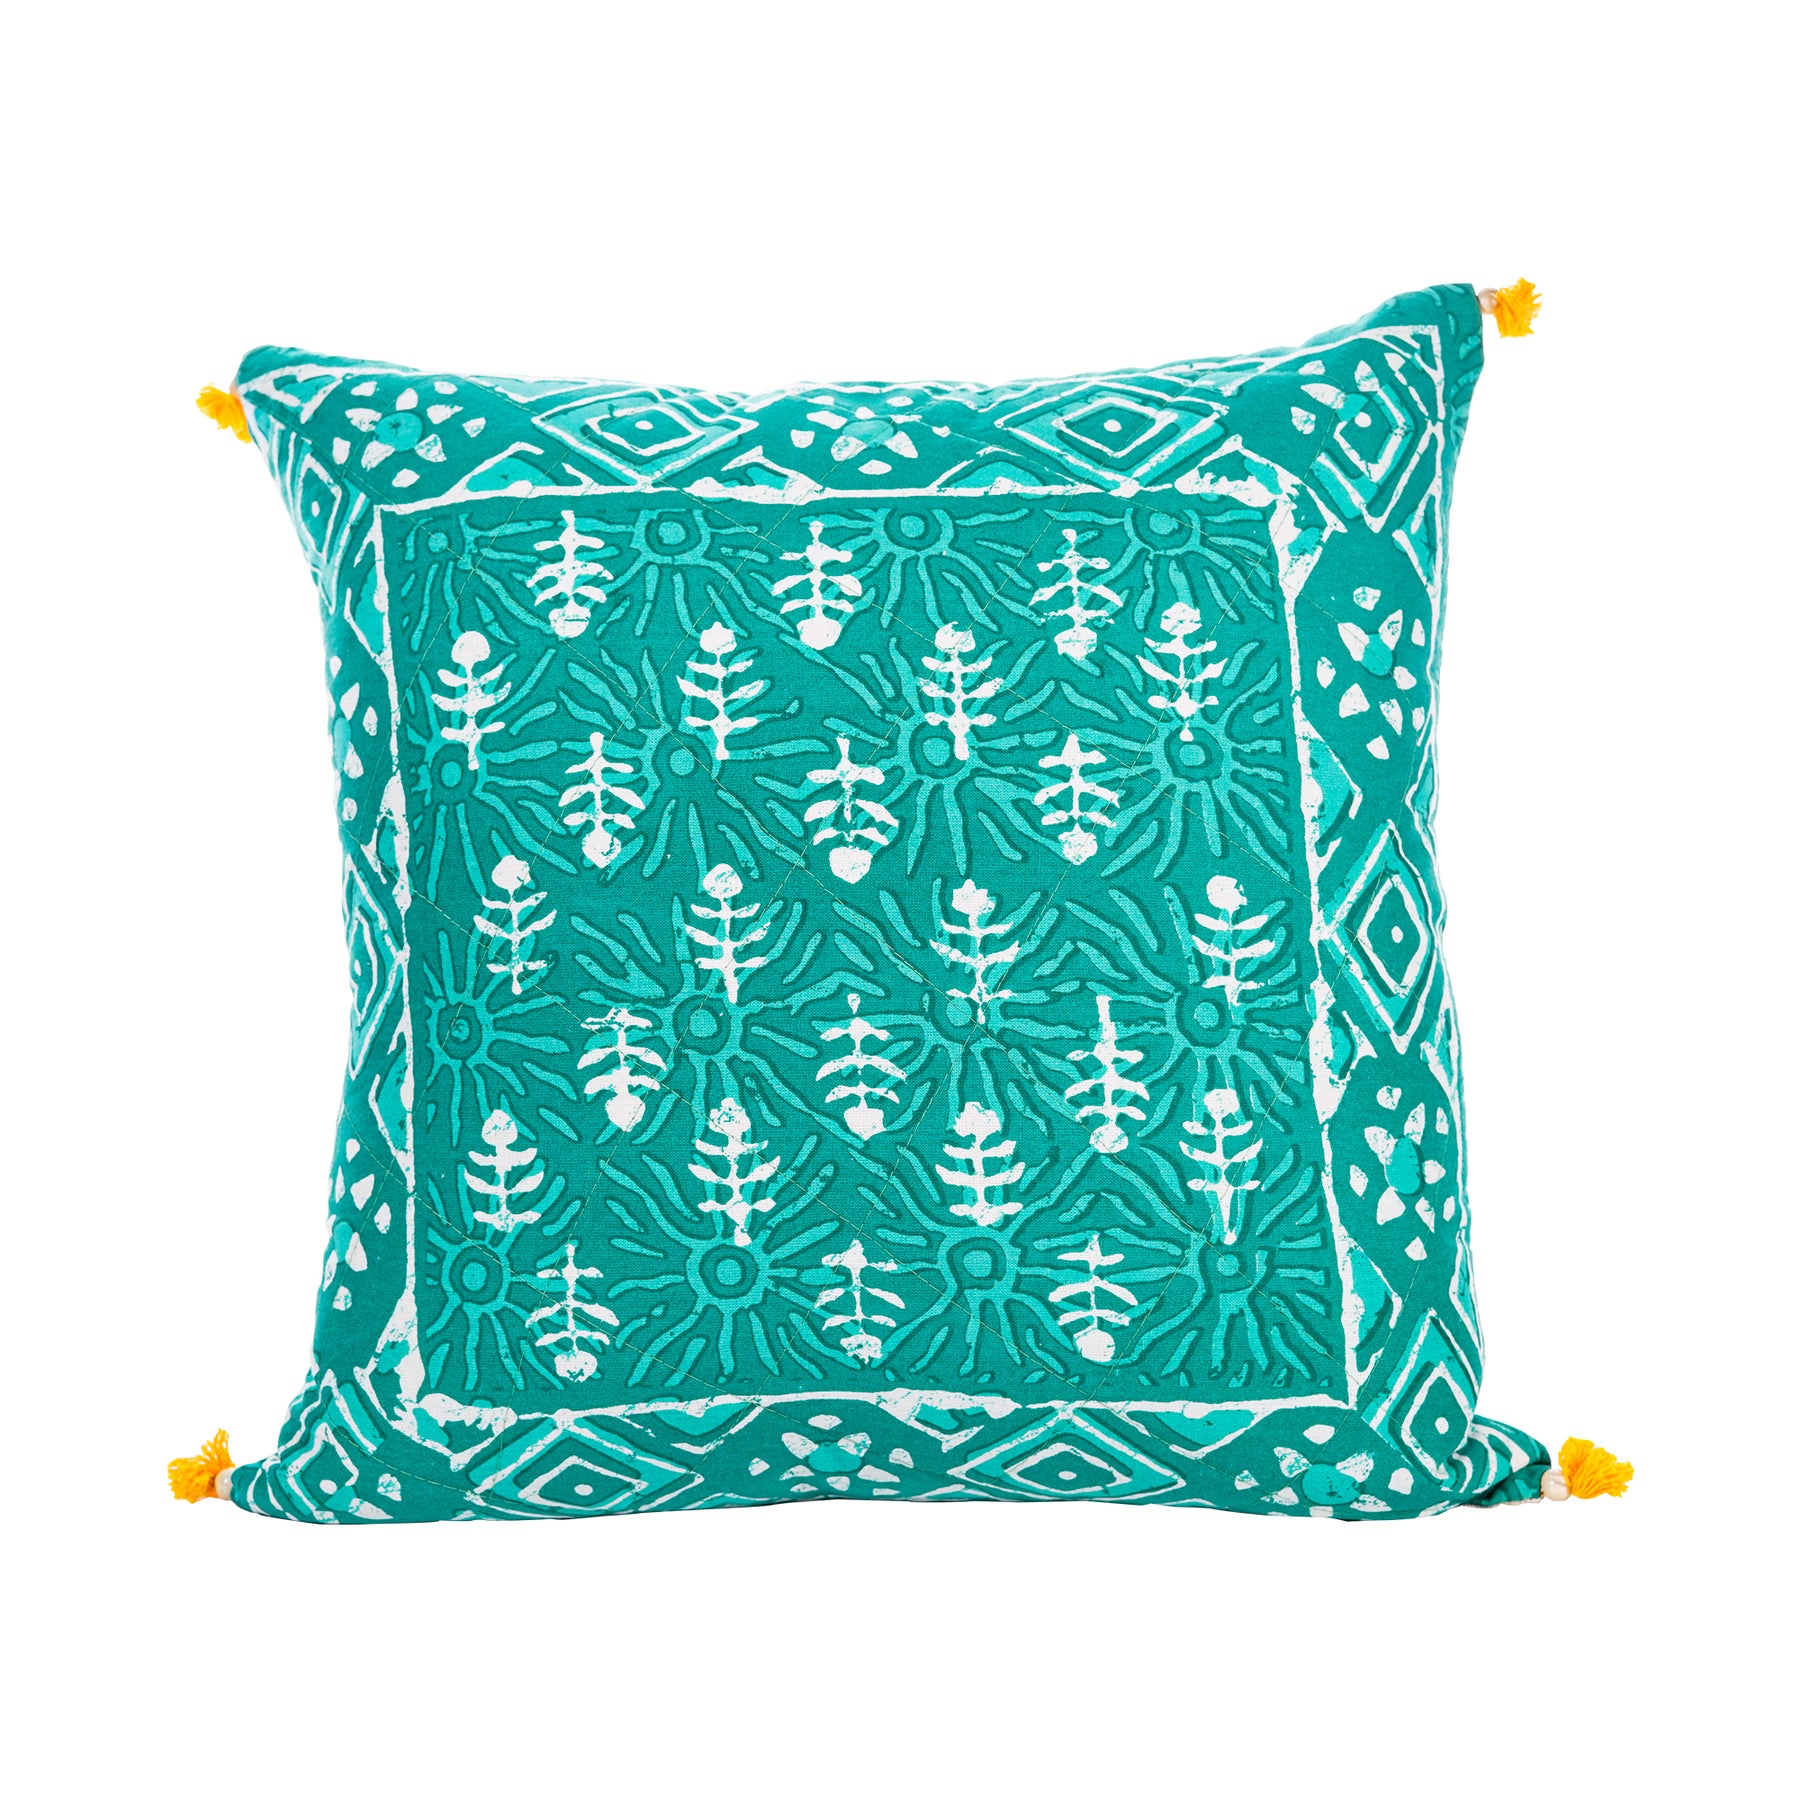 Inizio Jaipuri Hand Block Unique Traditional Print Cushions Covers with Zip Closer Luxurious Colorful Ethnic Decorative Cotton Square Pillow Cover for Sofa & Home Decoration